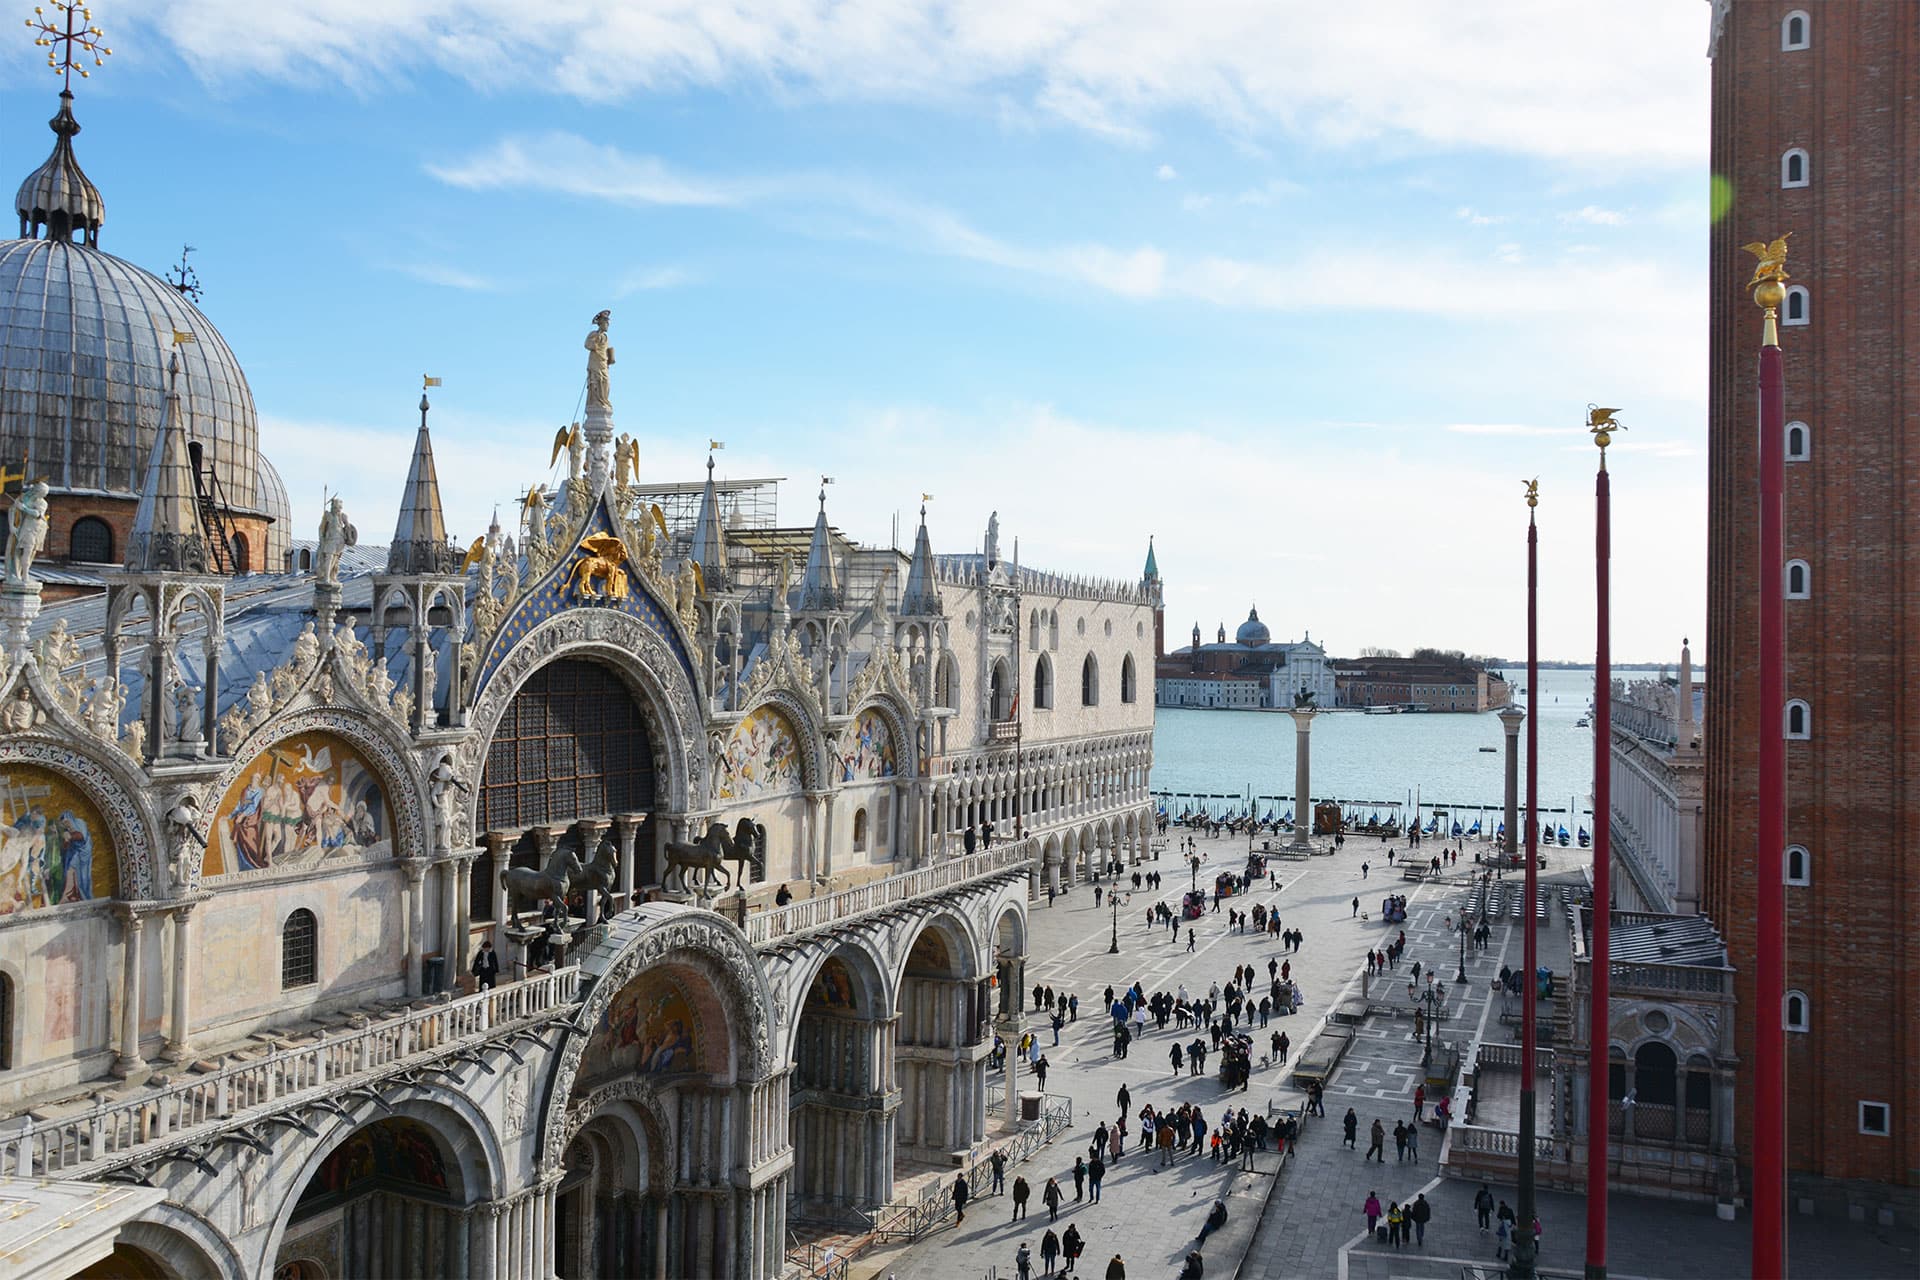 Facade of the Basilica of San Marco, Palazzo Ducale and Bacino seen from above. Sestiere of San Marco